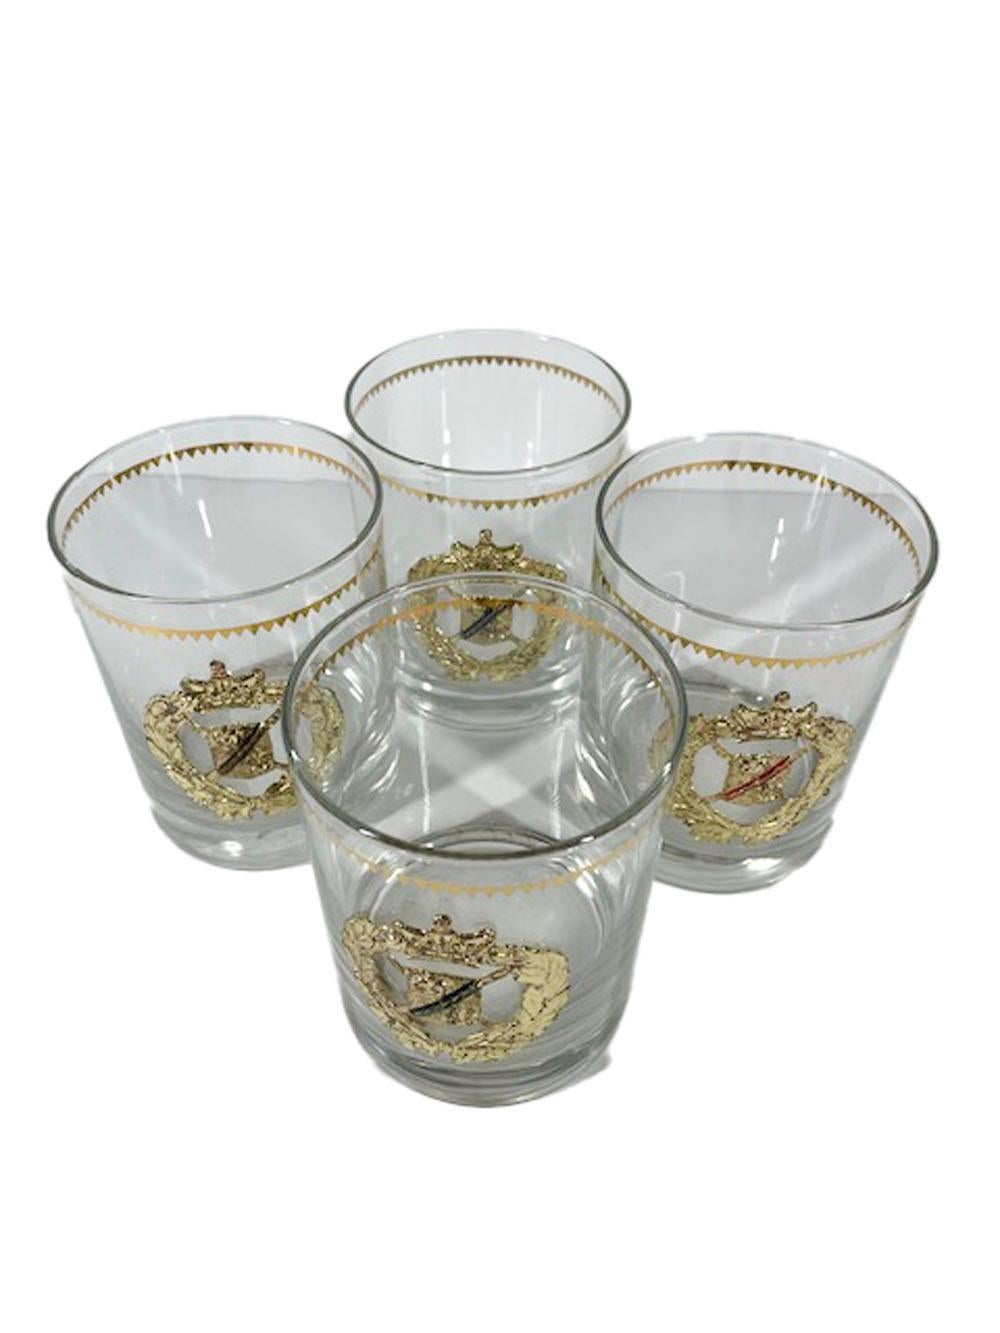 Set of 4 Mid-Century Modern rocks glasses designed by Georges Briard. Each having a saw-toothed gold band above an applied gilt metal laurel wreath centering an heraldic shield, each shield with a different colored enamel diagonal line.